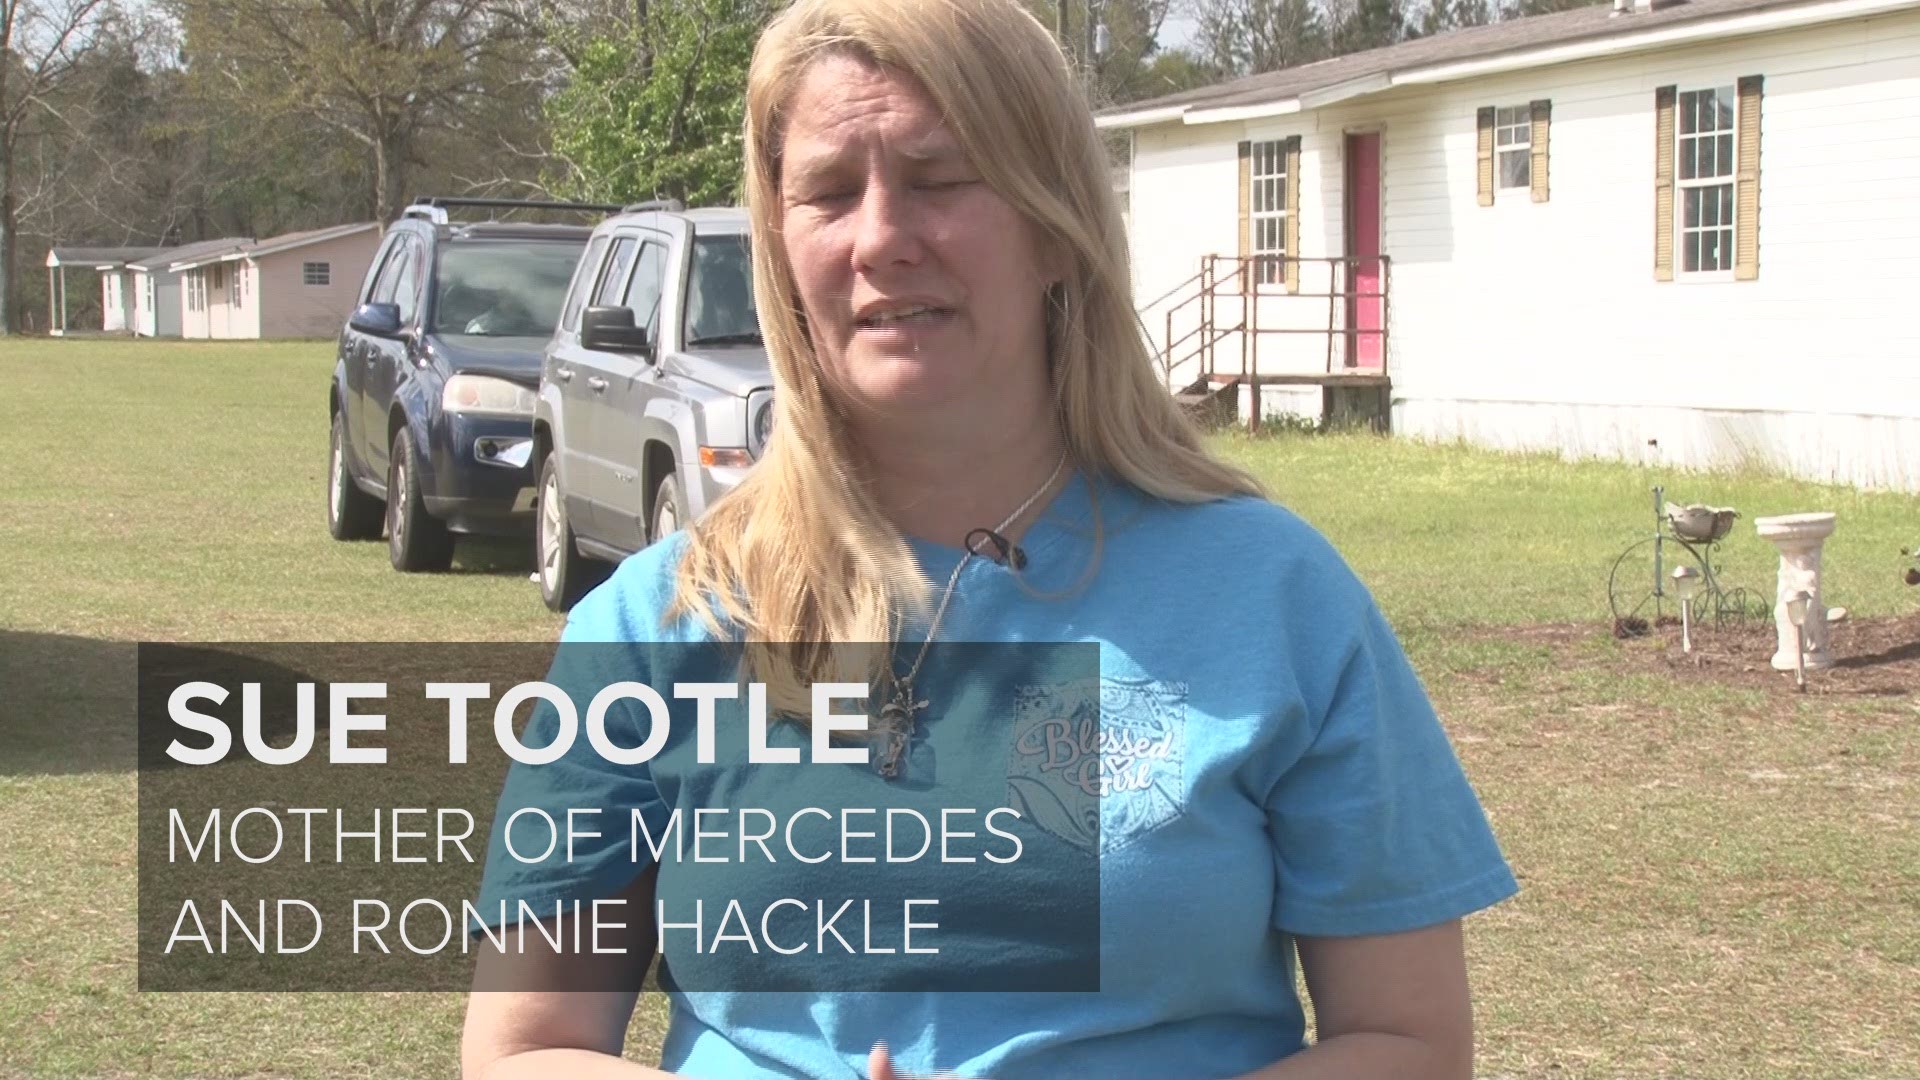 Sue Tootle is the mother of two of three people who went missing in Berrien County earlier this week after a car was found on fire near the Alahapa River. The Georgia Bureau of Investigation says the remains of two people have been found, but have not been identified.